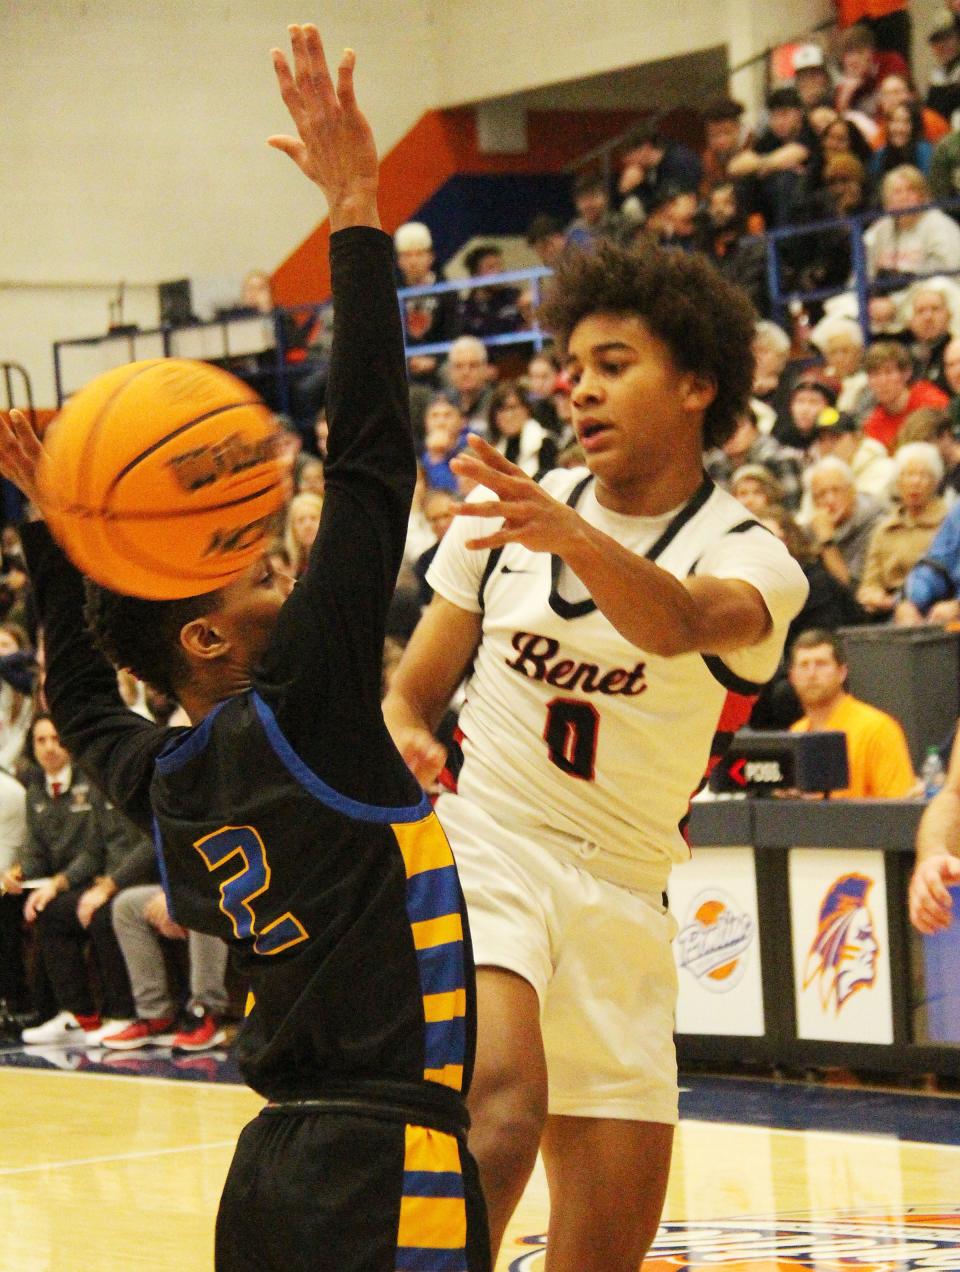 Brayden Fagbemi of Benet tosses a pass around Simeon defender Jalen Griffith in Friday's championship game of the 91st Pontiac Holiday Tournament. Griffith led Simeon to the title with a game-high 17 points.